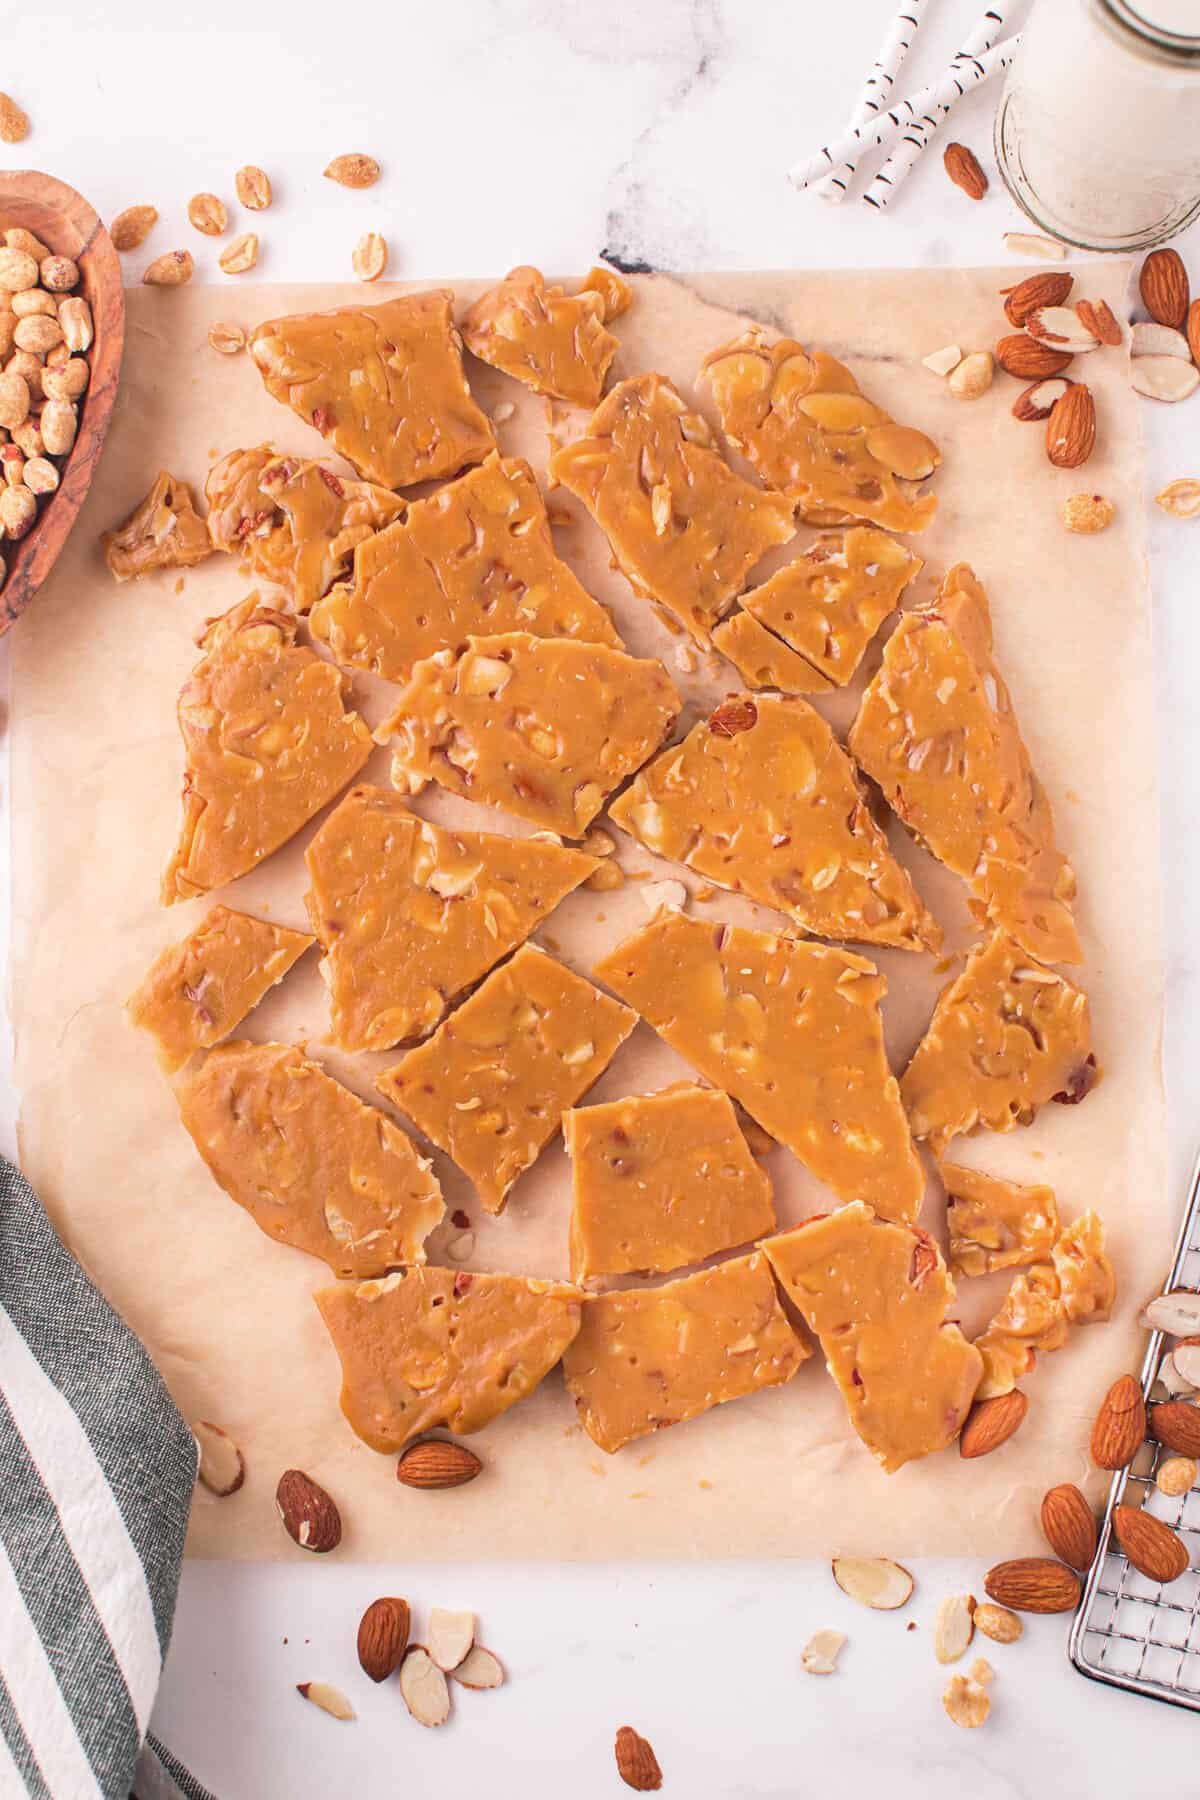 Pieces of nut brittle on parchment paper with almonds and pecans around them.